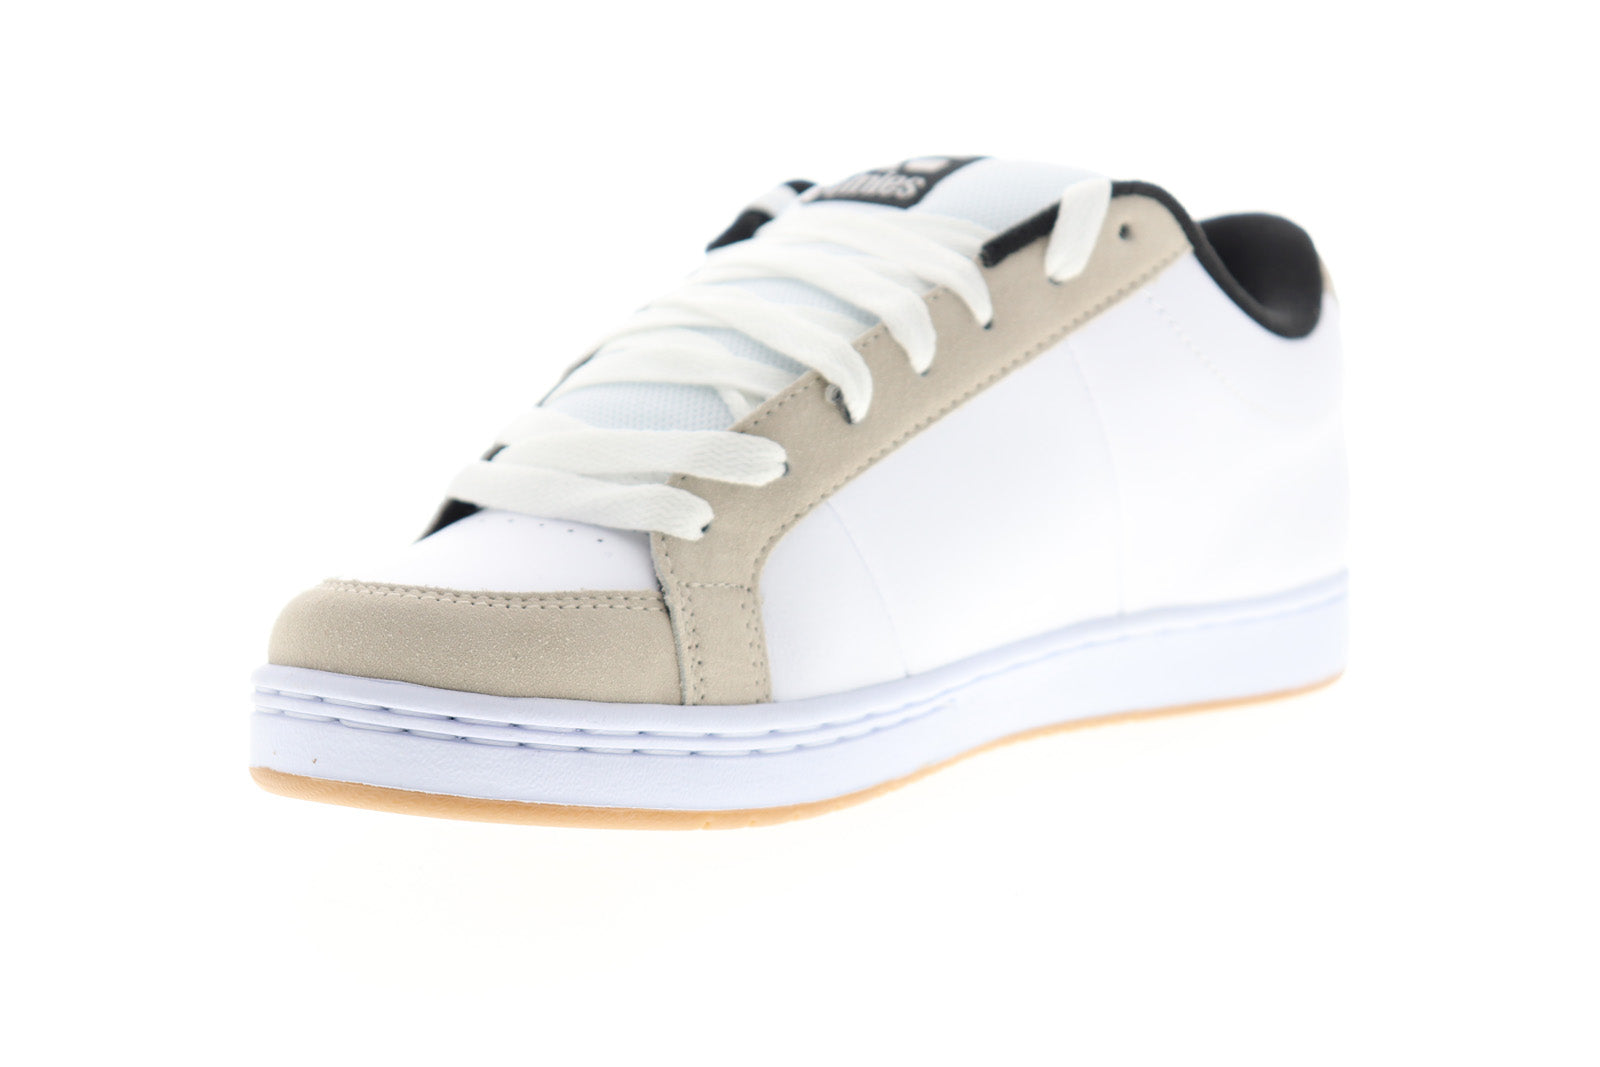 Etnies Kingpin Mens White Leather Low Top Lace Up Skate Sneakers Shoes ...